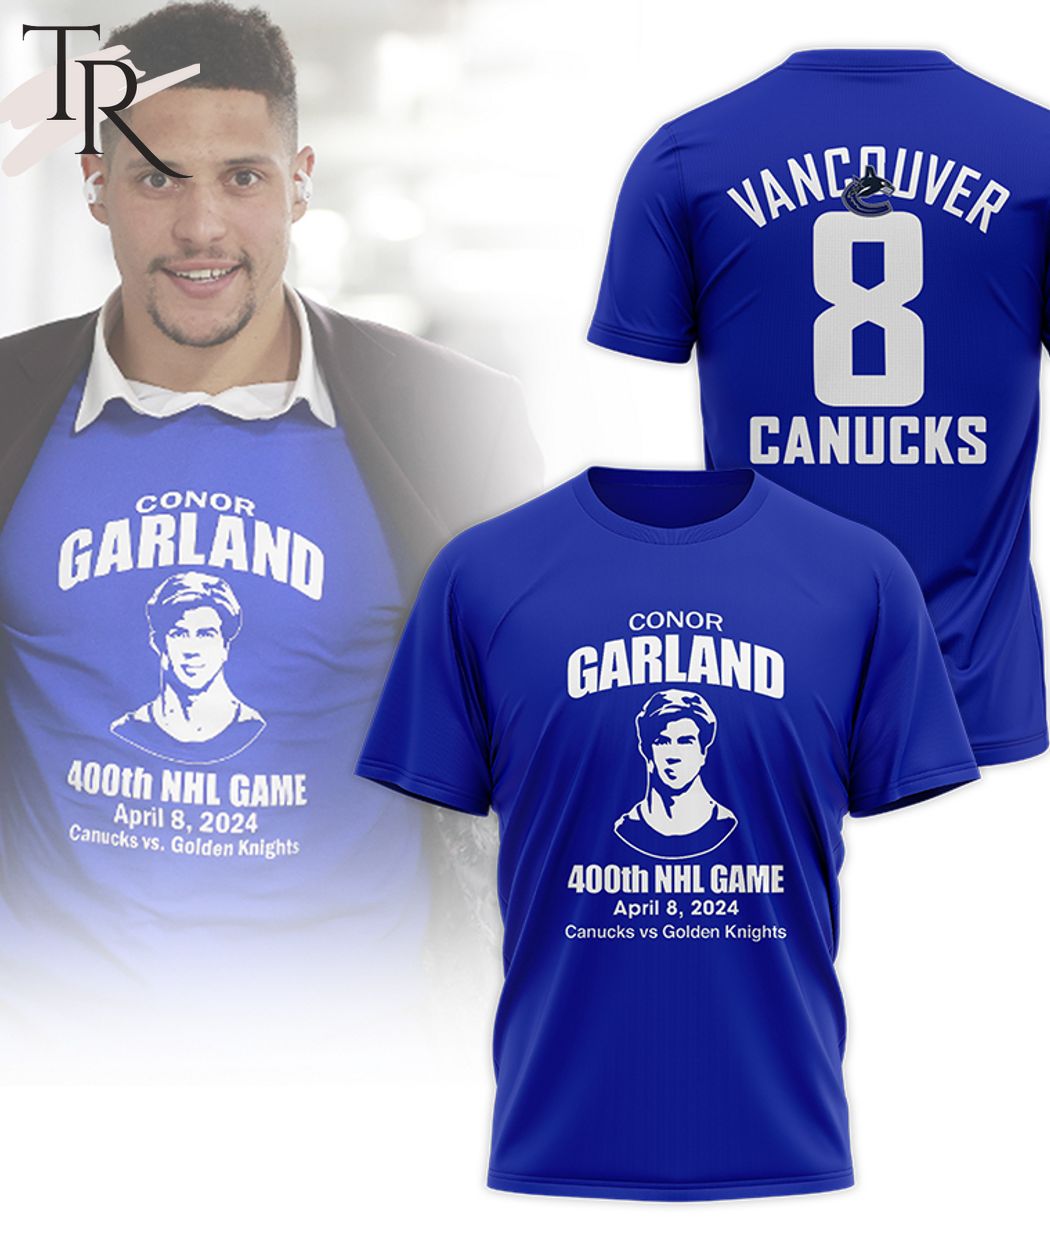 Conor Garland 400th NHL Game April 8, 2024 Canucks Vs Golden Knights T-Shirt